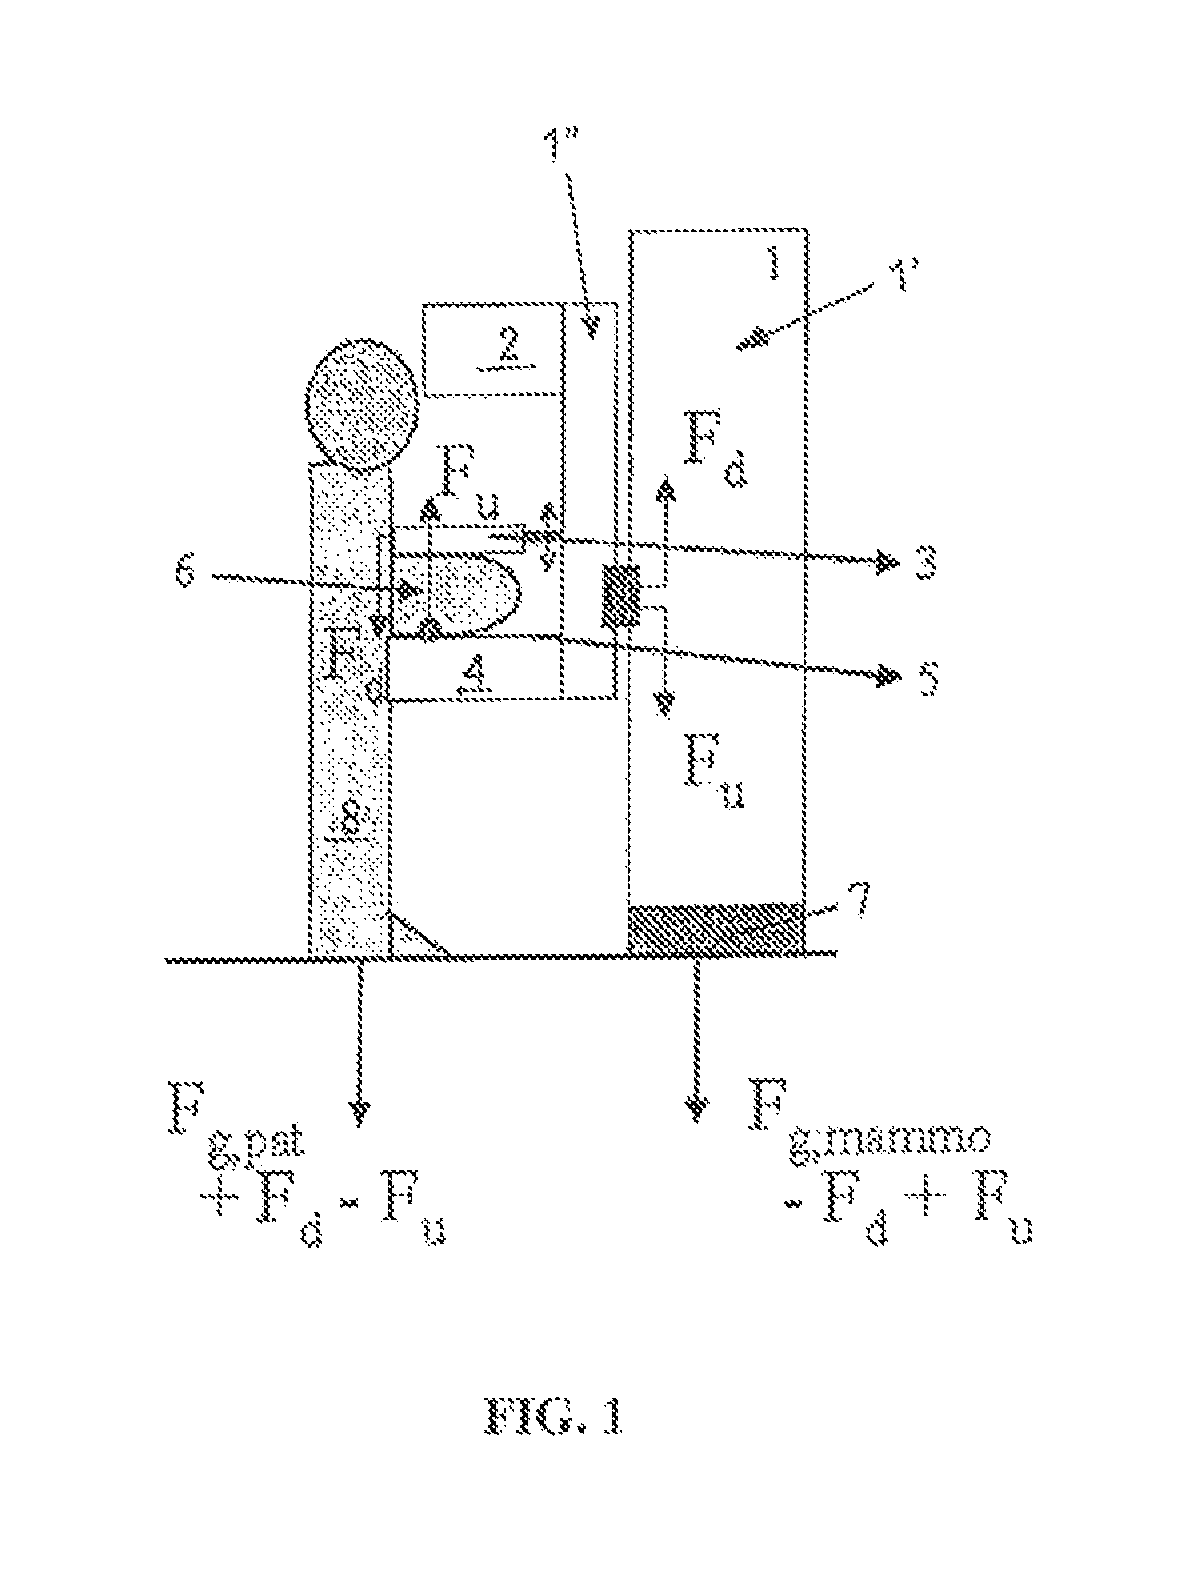 Mammography apparatus and method to adjust or tune the mechanical settings of such a mammography apparatus